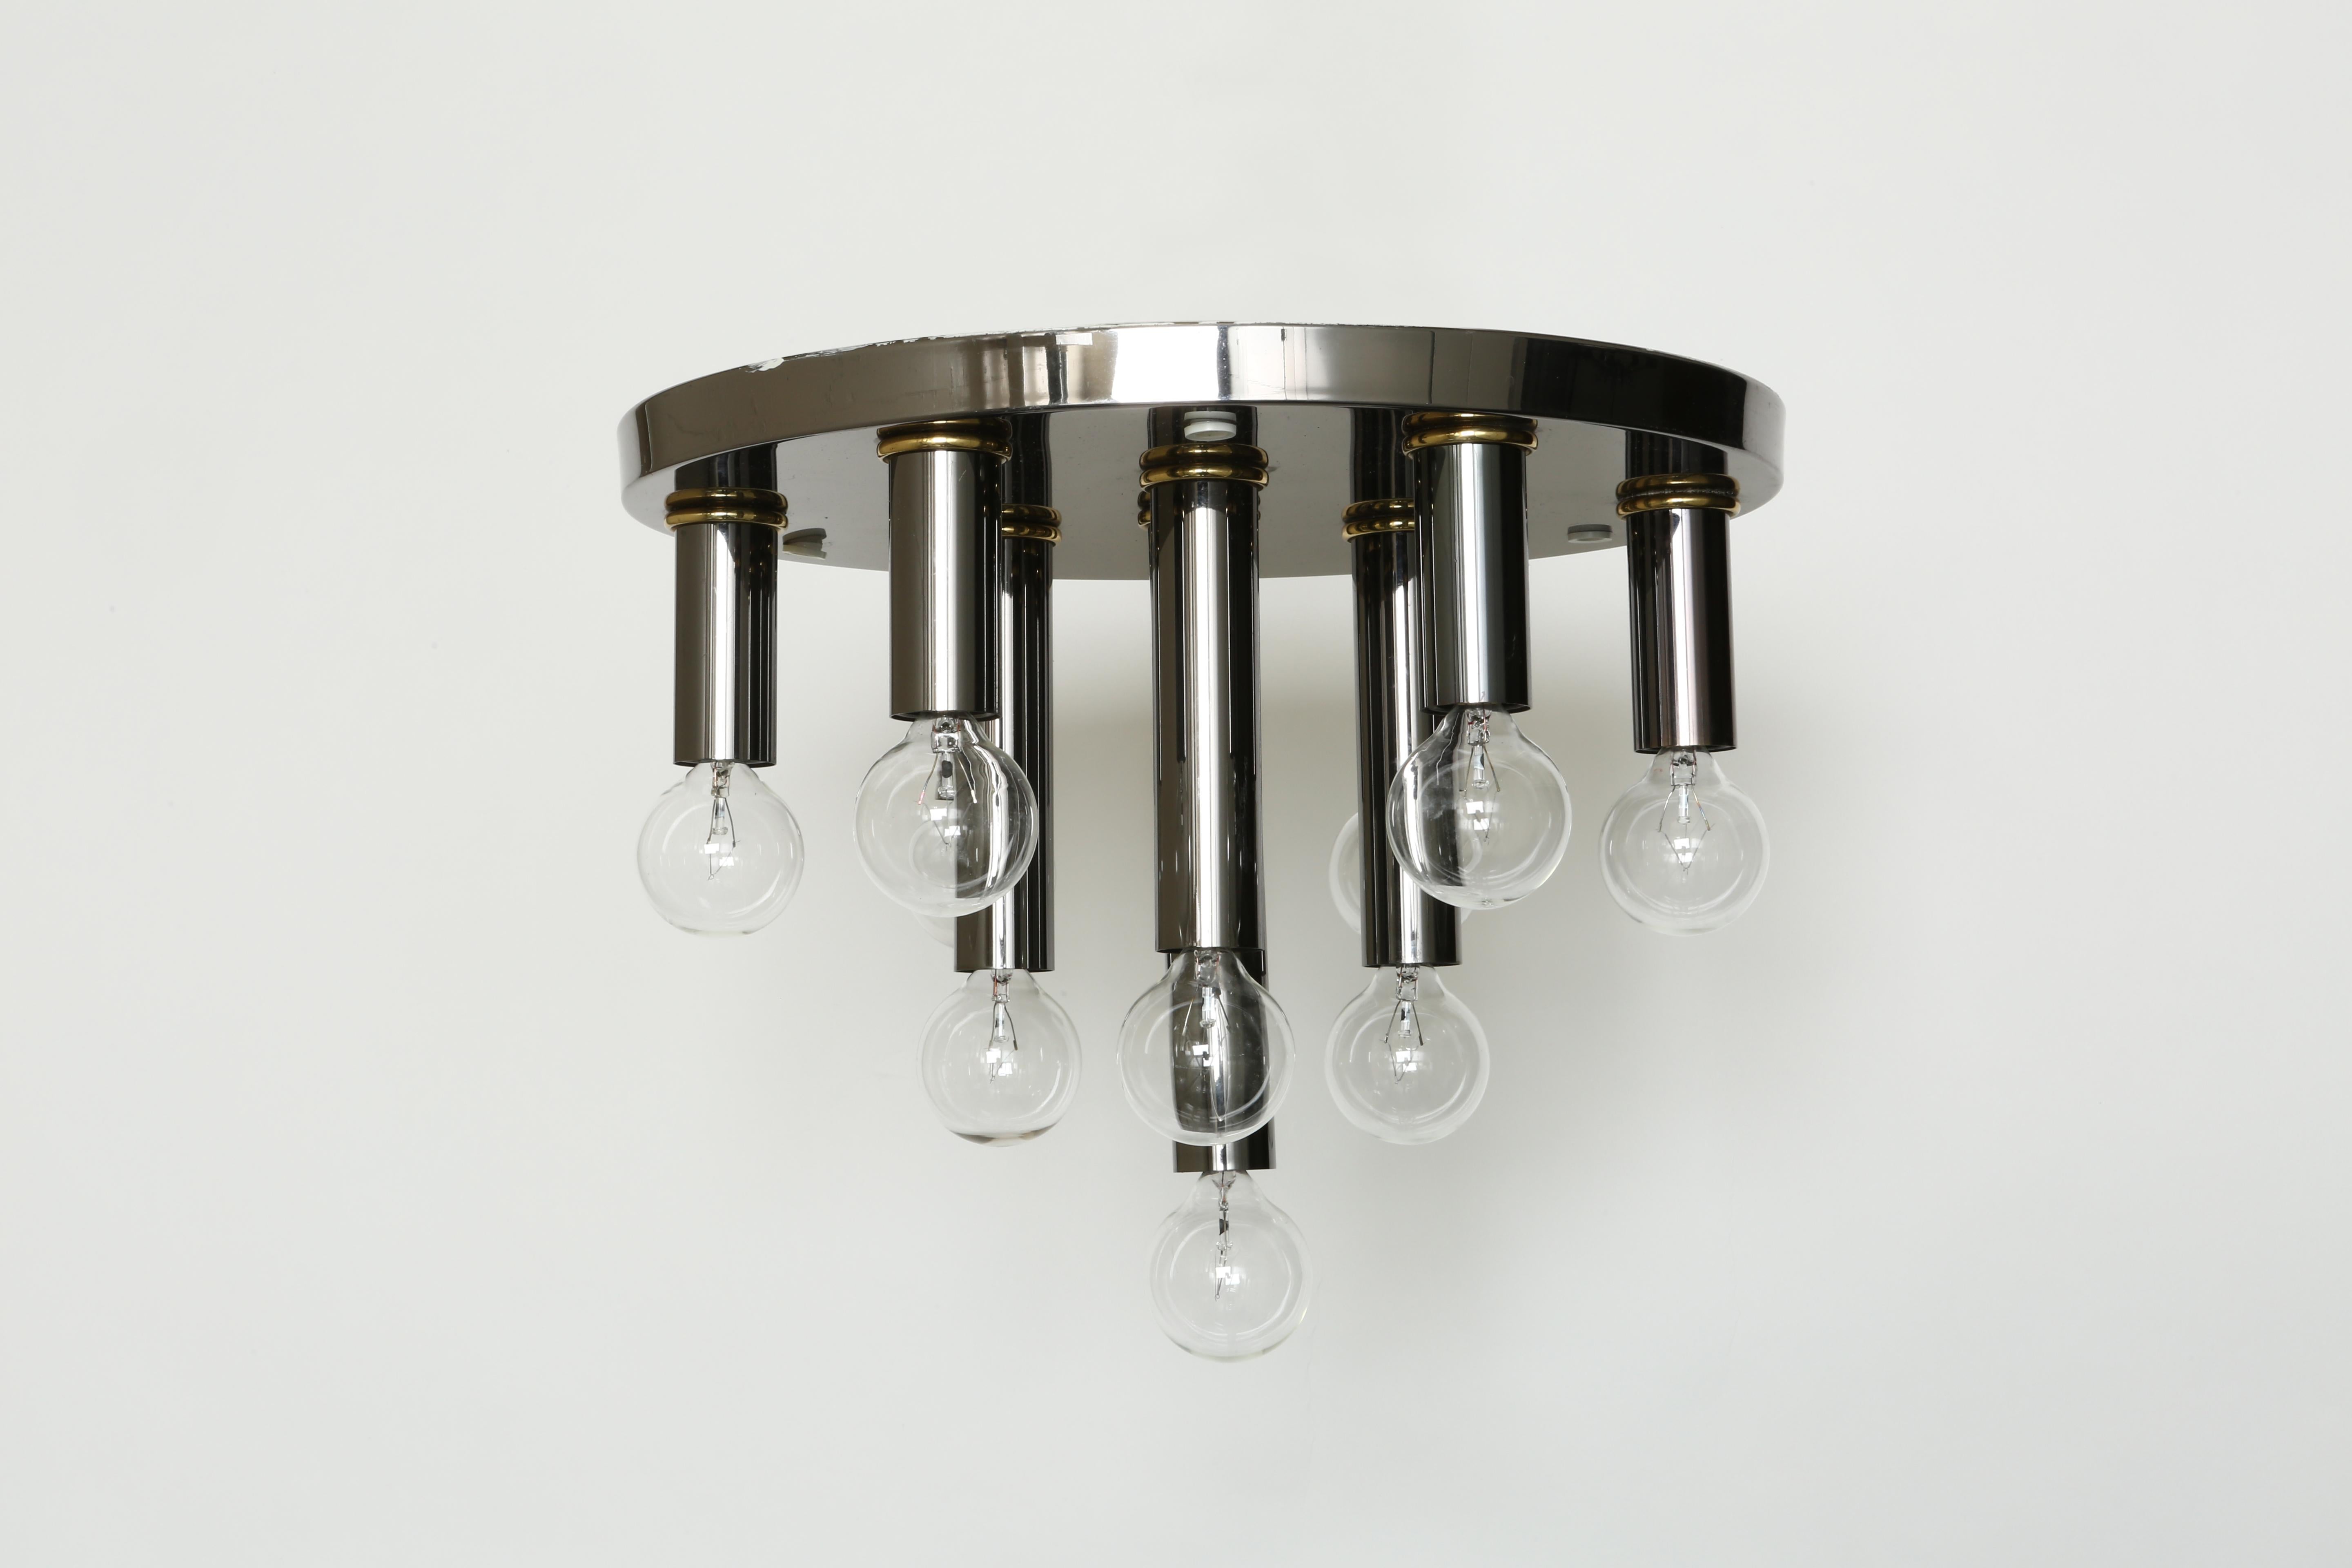 Mid-Century Modern flush mount.
Germany, 1970s.
Enameled metal.
10 candelabra sockets.
Also available in white.